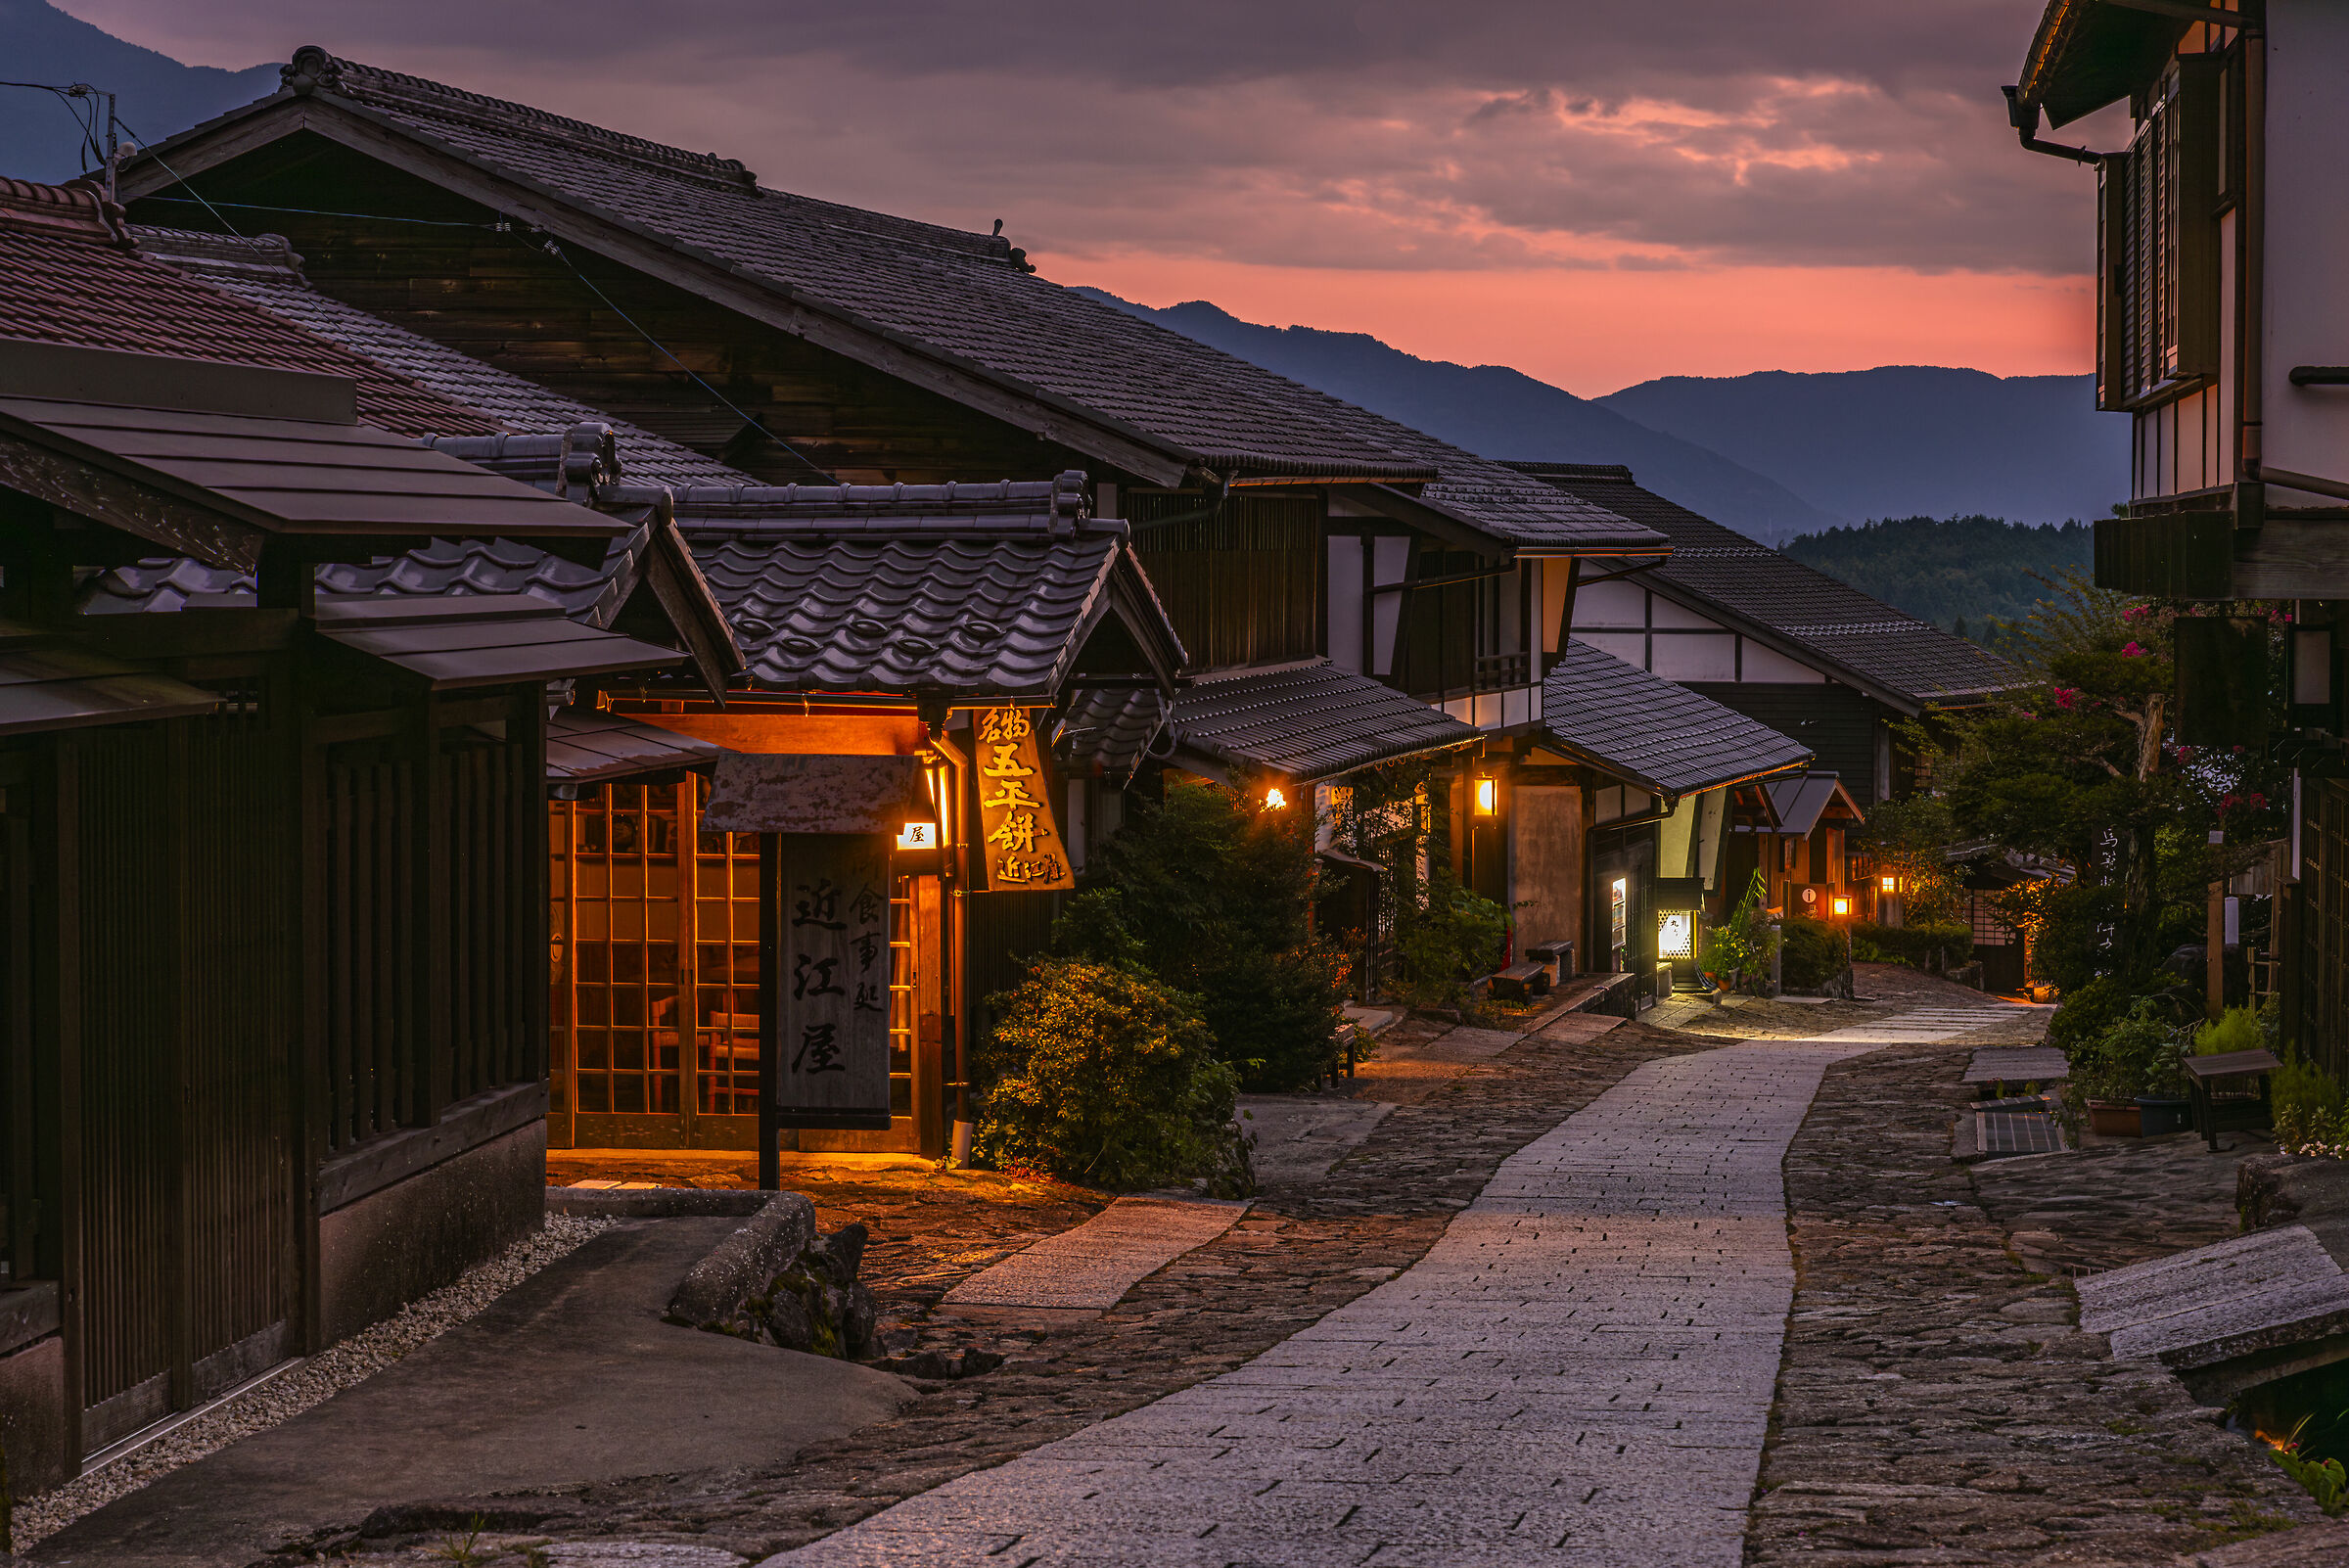 Tsumago, on the ancient path of the Samurai...